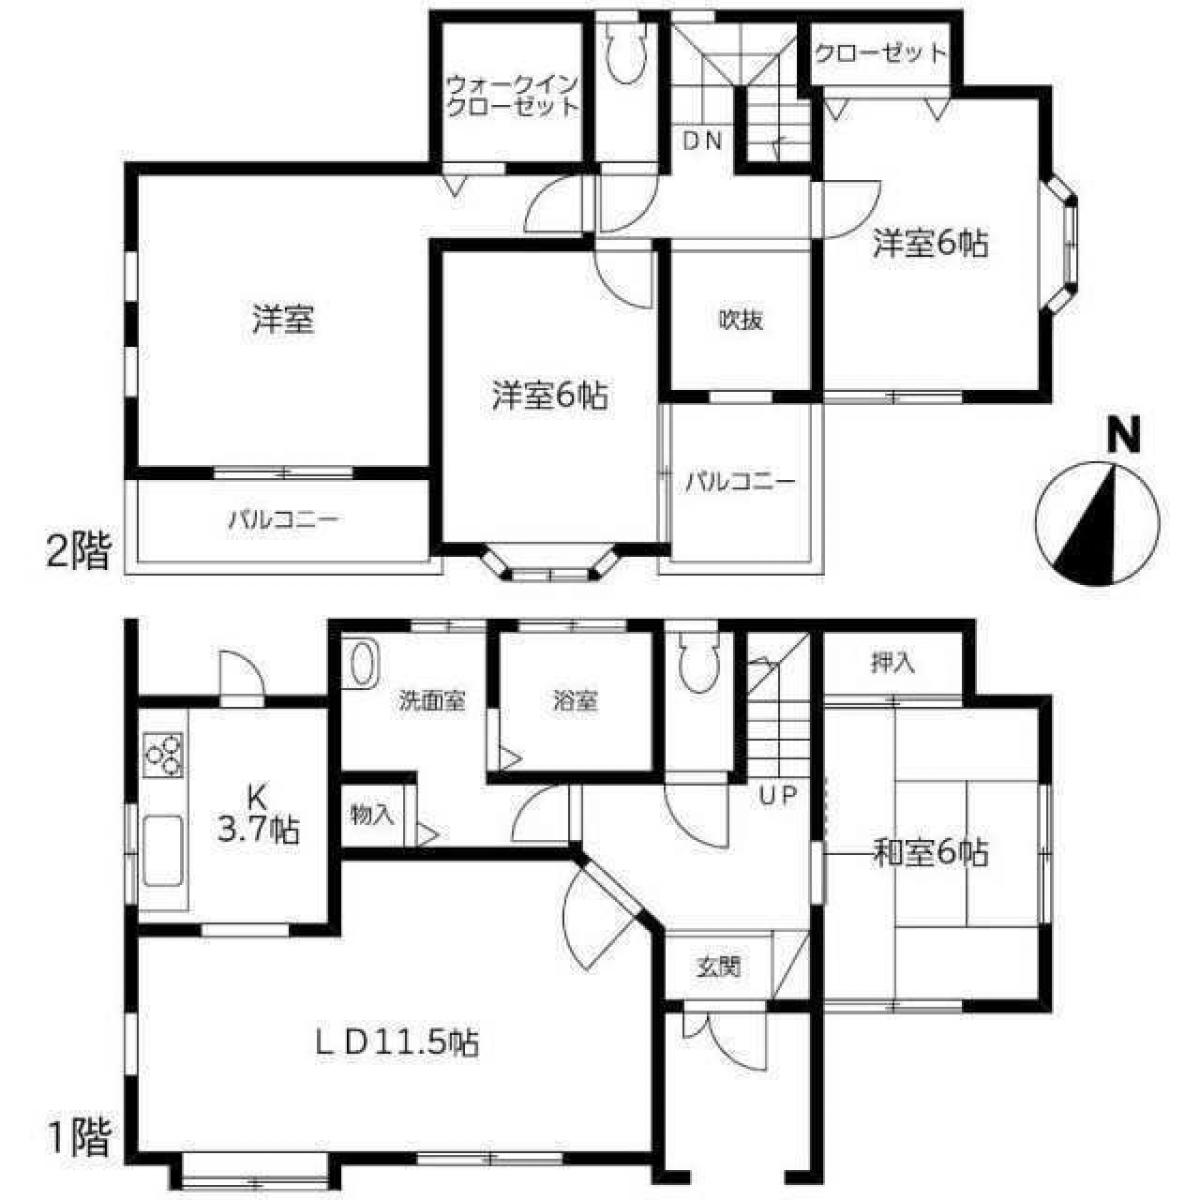 Picture of Home For Sale in Togane Shi, Chiba, Japan